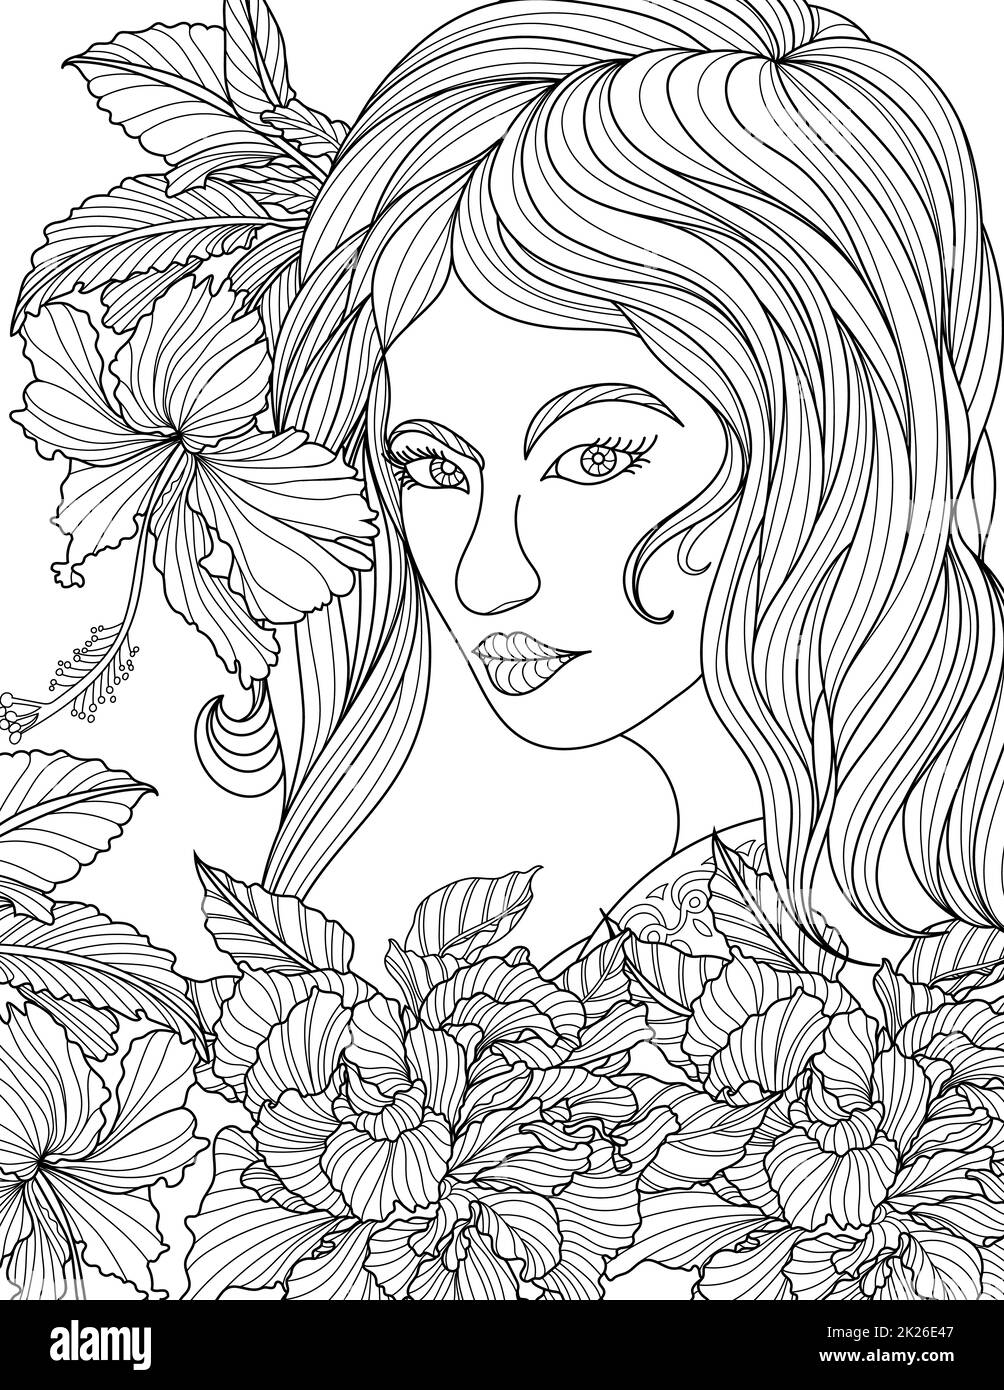 Lady Face Line Drawing With Long Hair Surrounded With Flowers Coloring Book idea Stock Photo